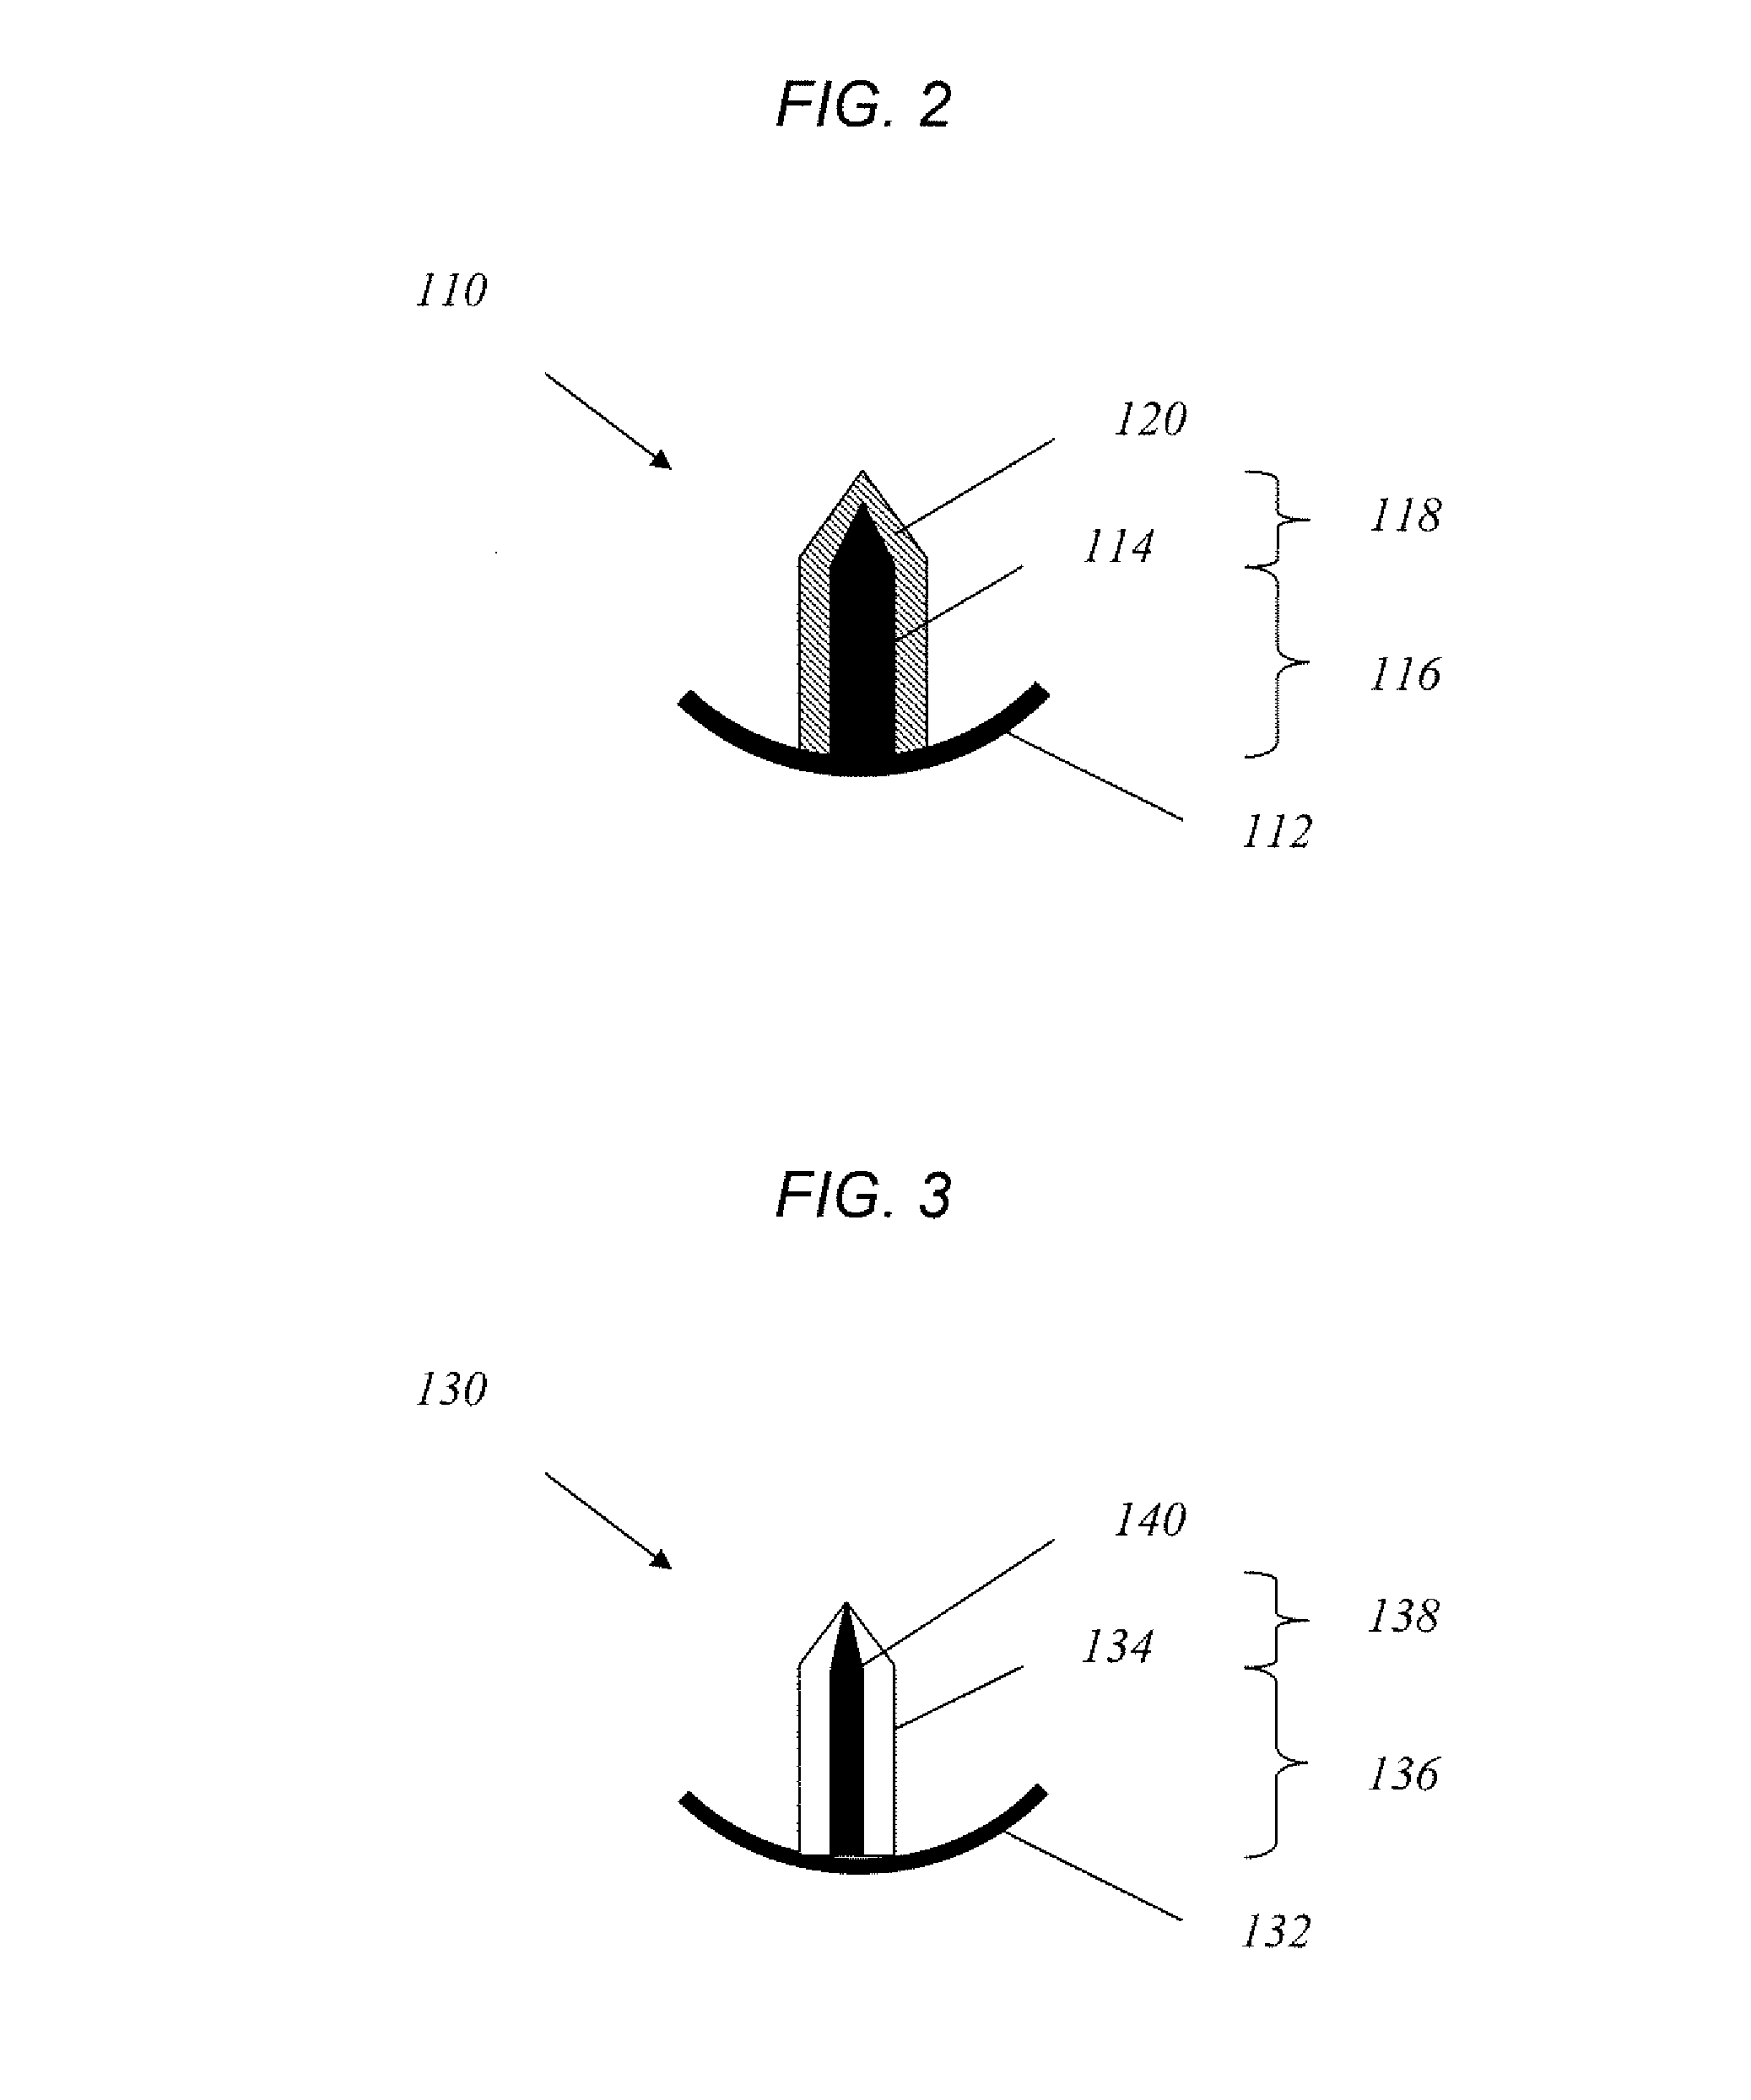 Method for drug delivery to ocular tissue using microneedle